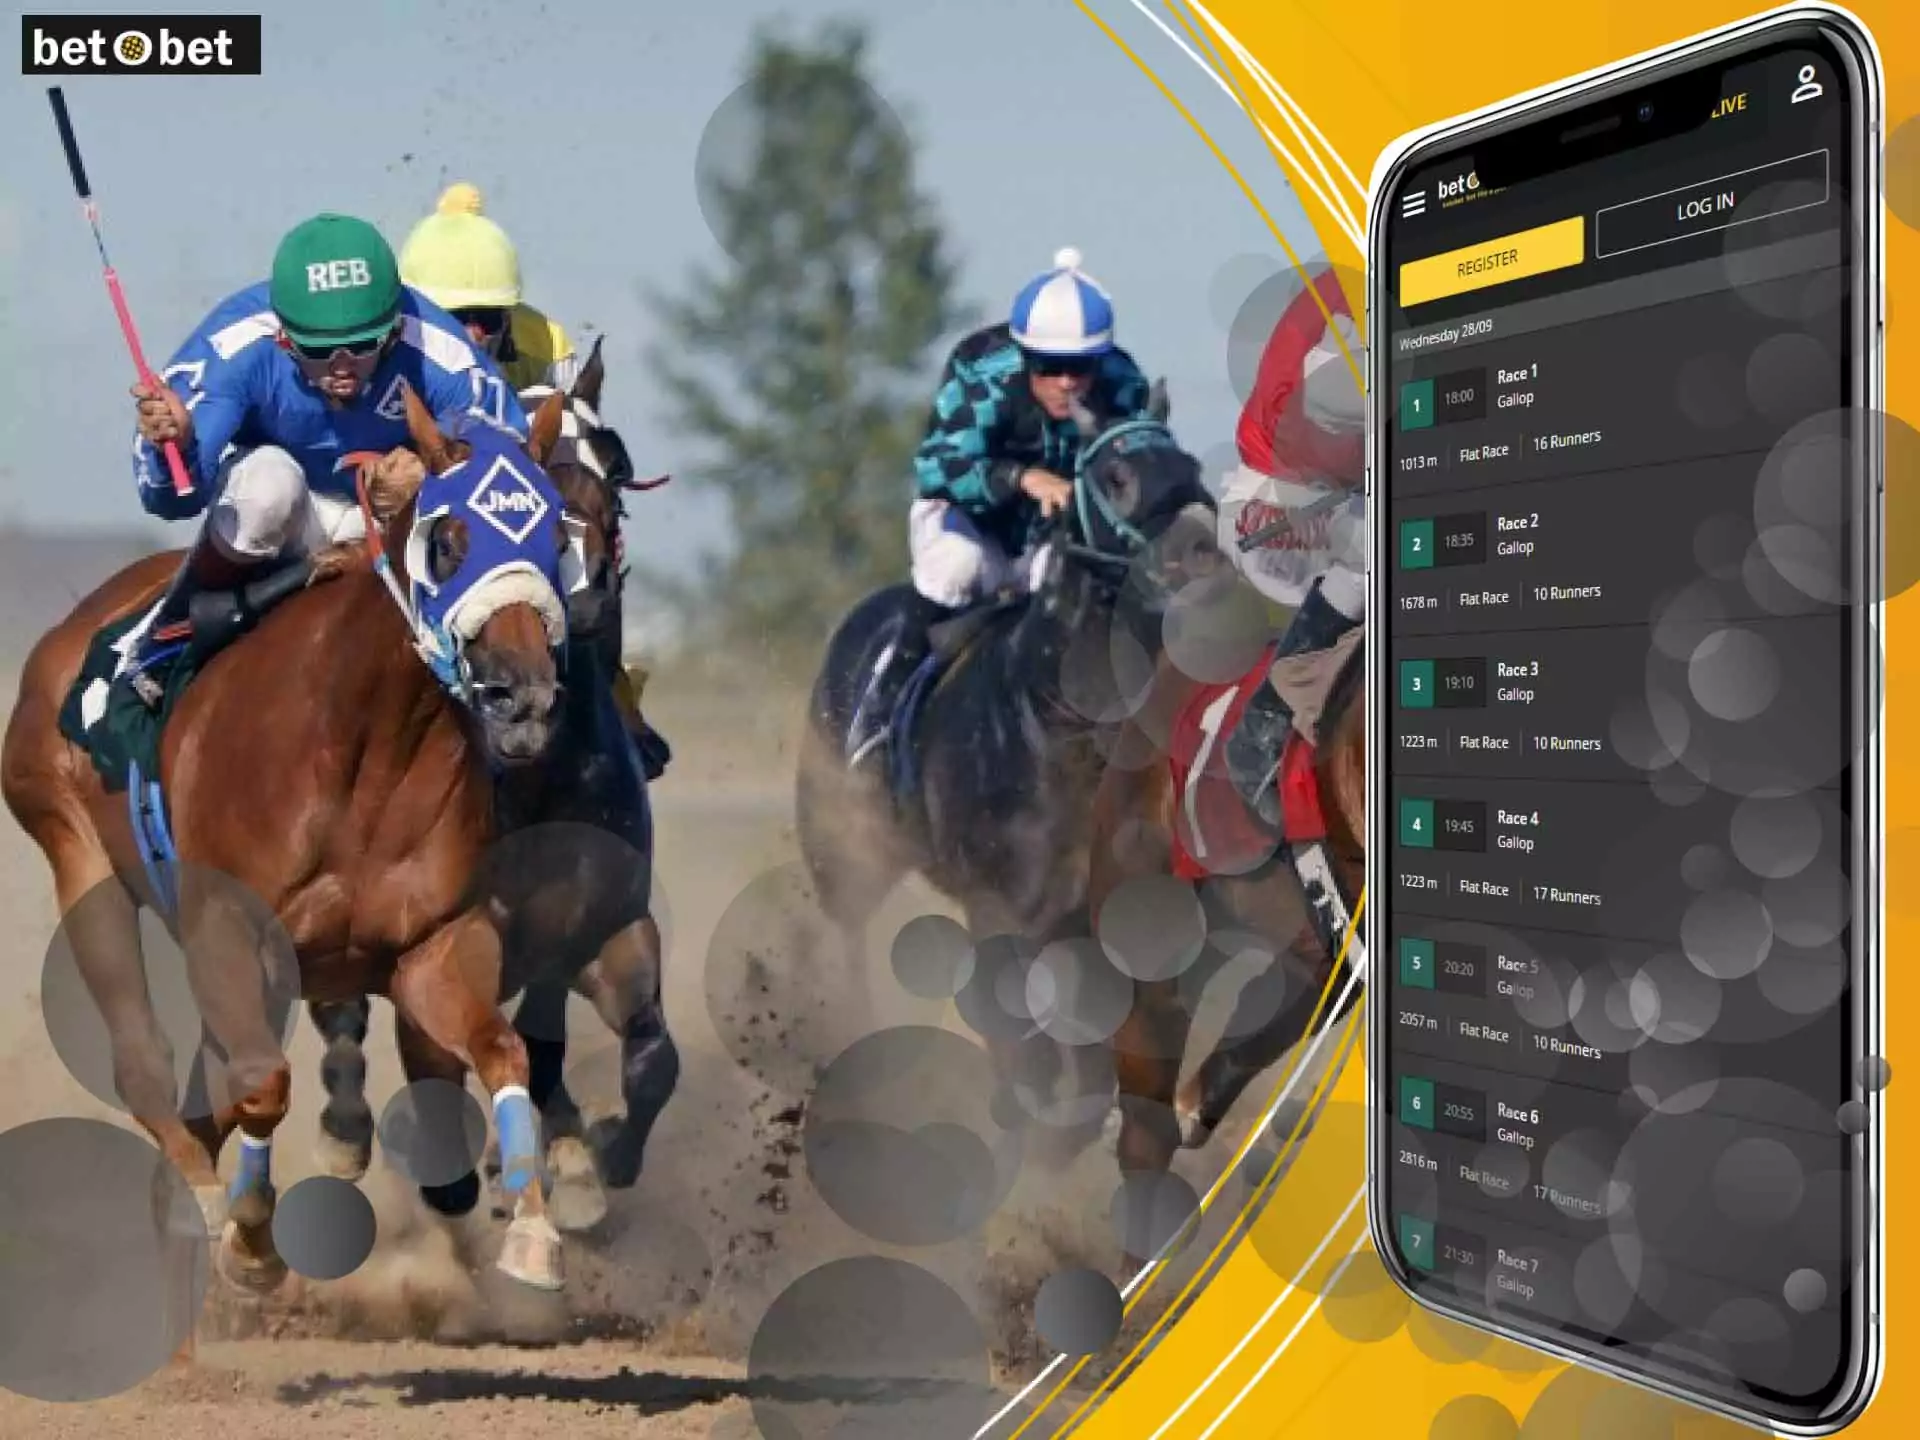 You can easily bet on horse racing in the BetOBet sportsbook.